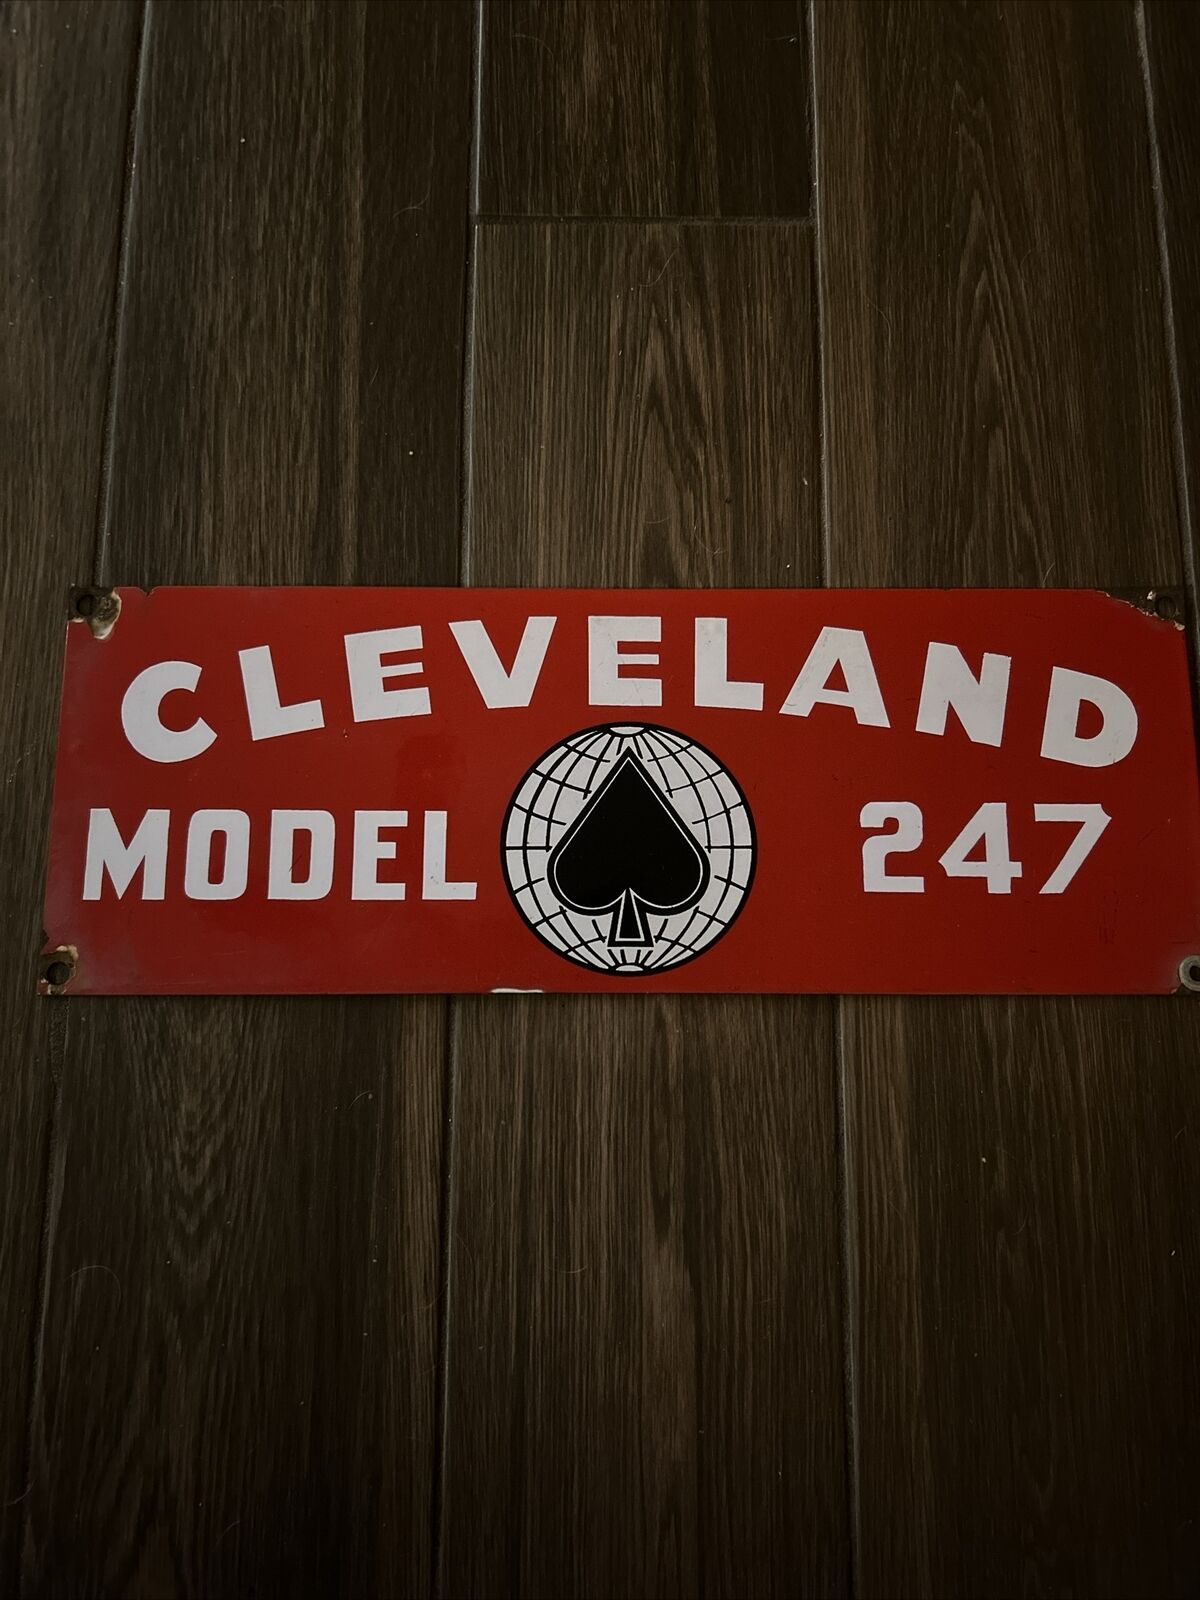 Vintage CLEVELAND Metal SIGN Advertising Machinery Excavator Gas & Oil